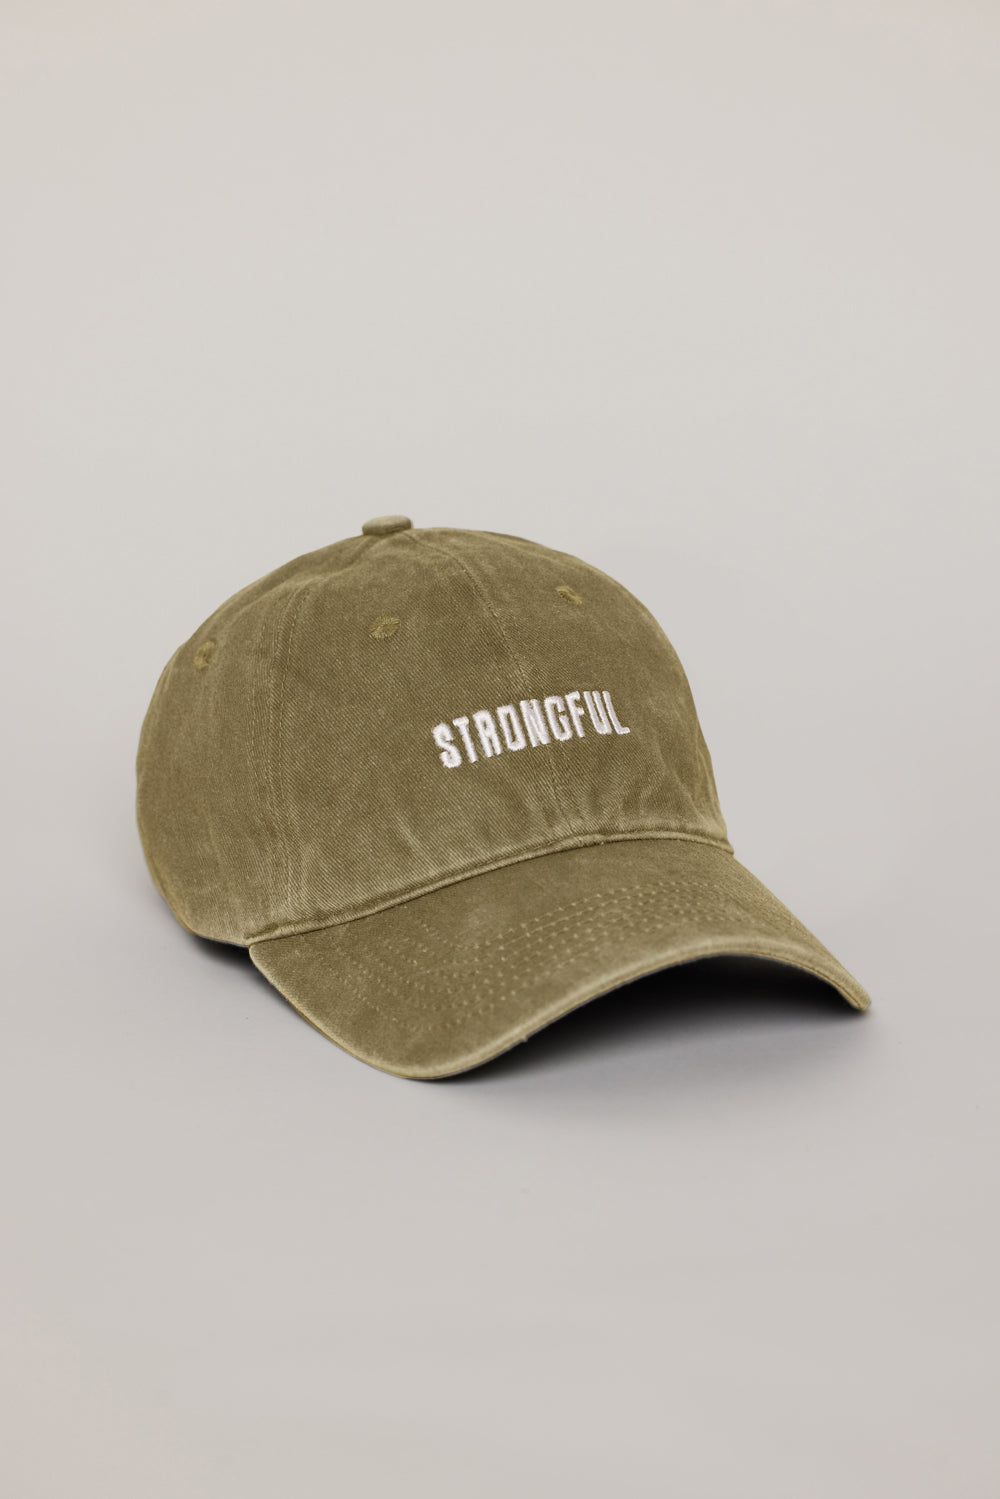 Free Washed hat